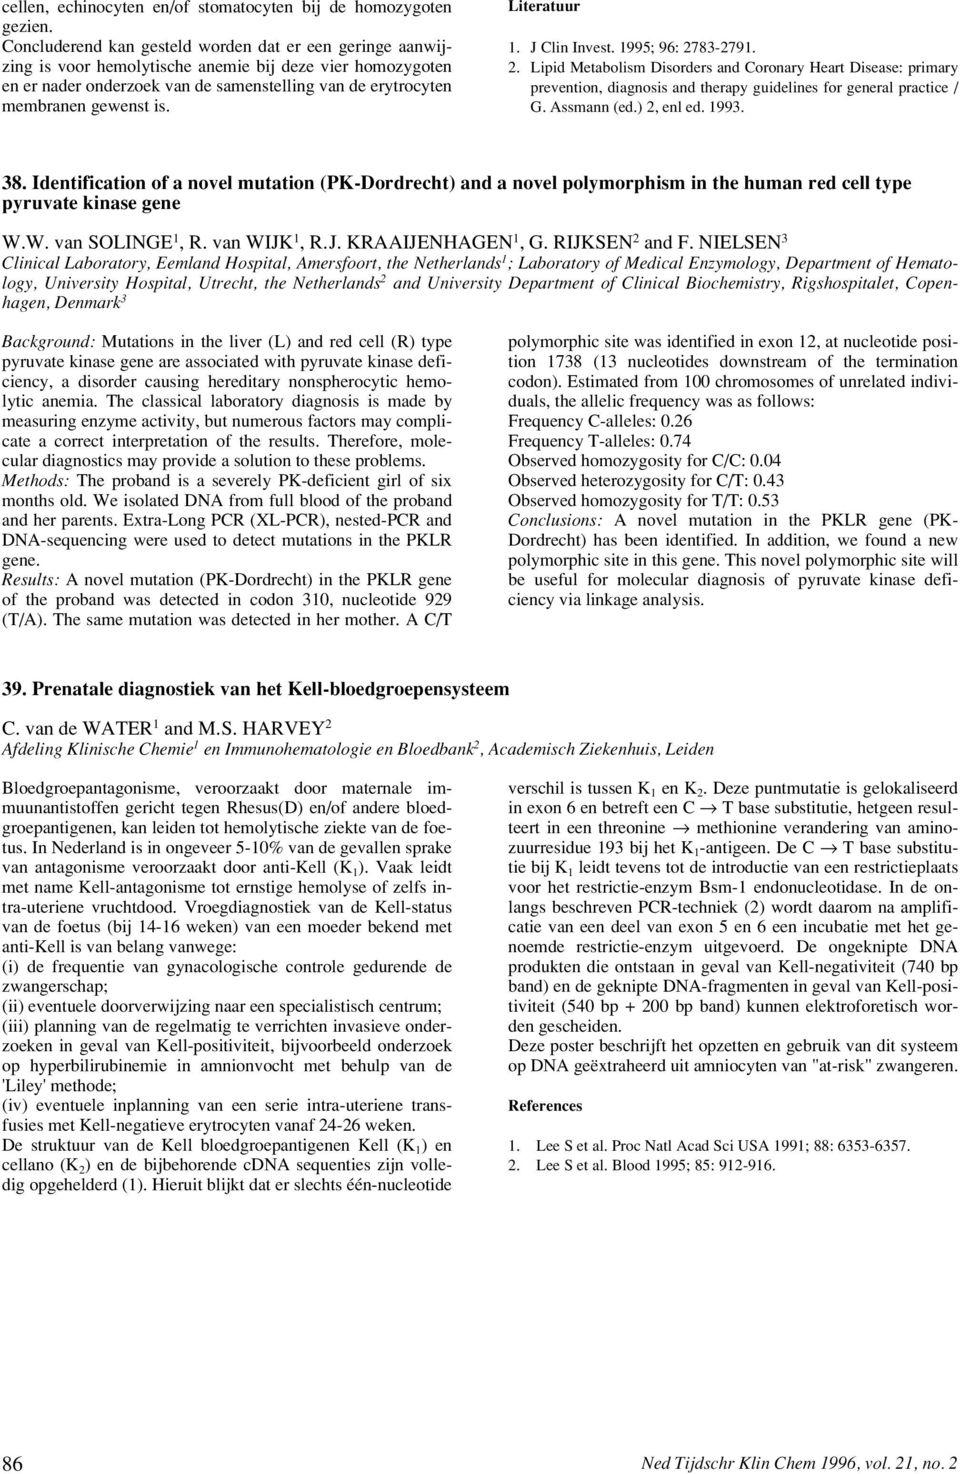 Literatuur 1. J Clin Invest. 1995; 96: 2783-2791. 2. Lipid Metabolism Disorders and Coronary Heart Disease: primary prevention, diagnosis and therapy guidelines for general practice / G. Assmann (ed.